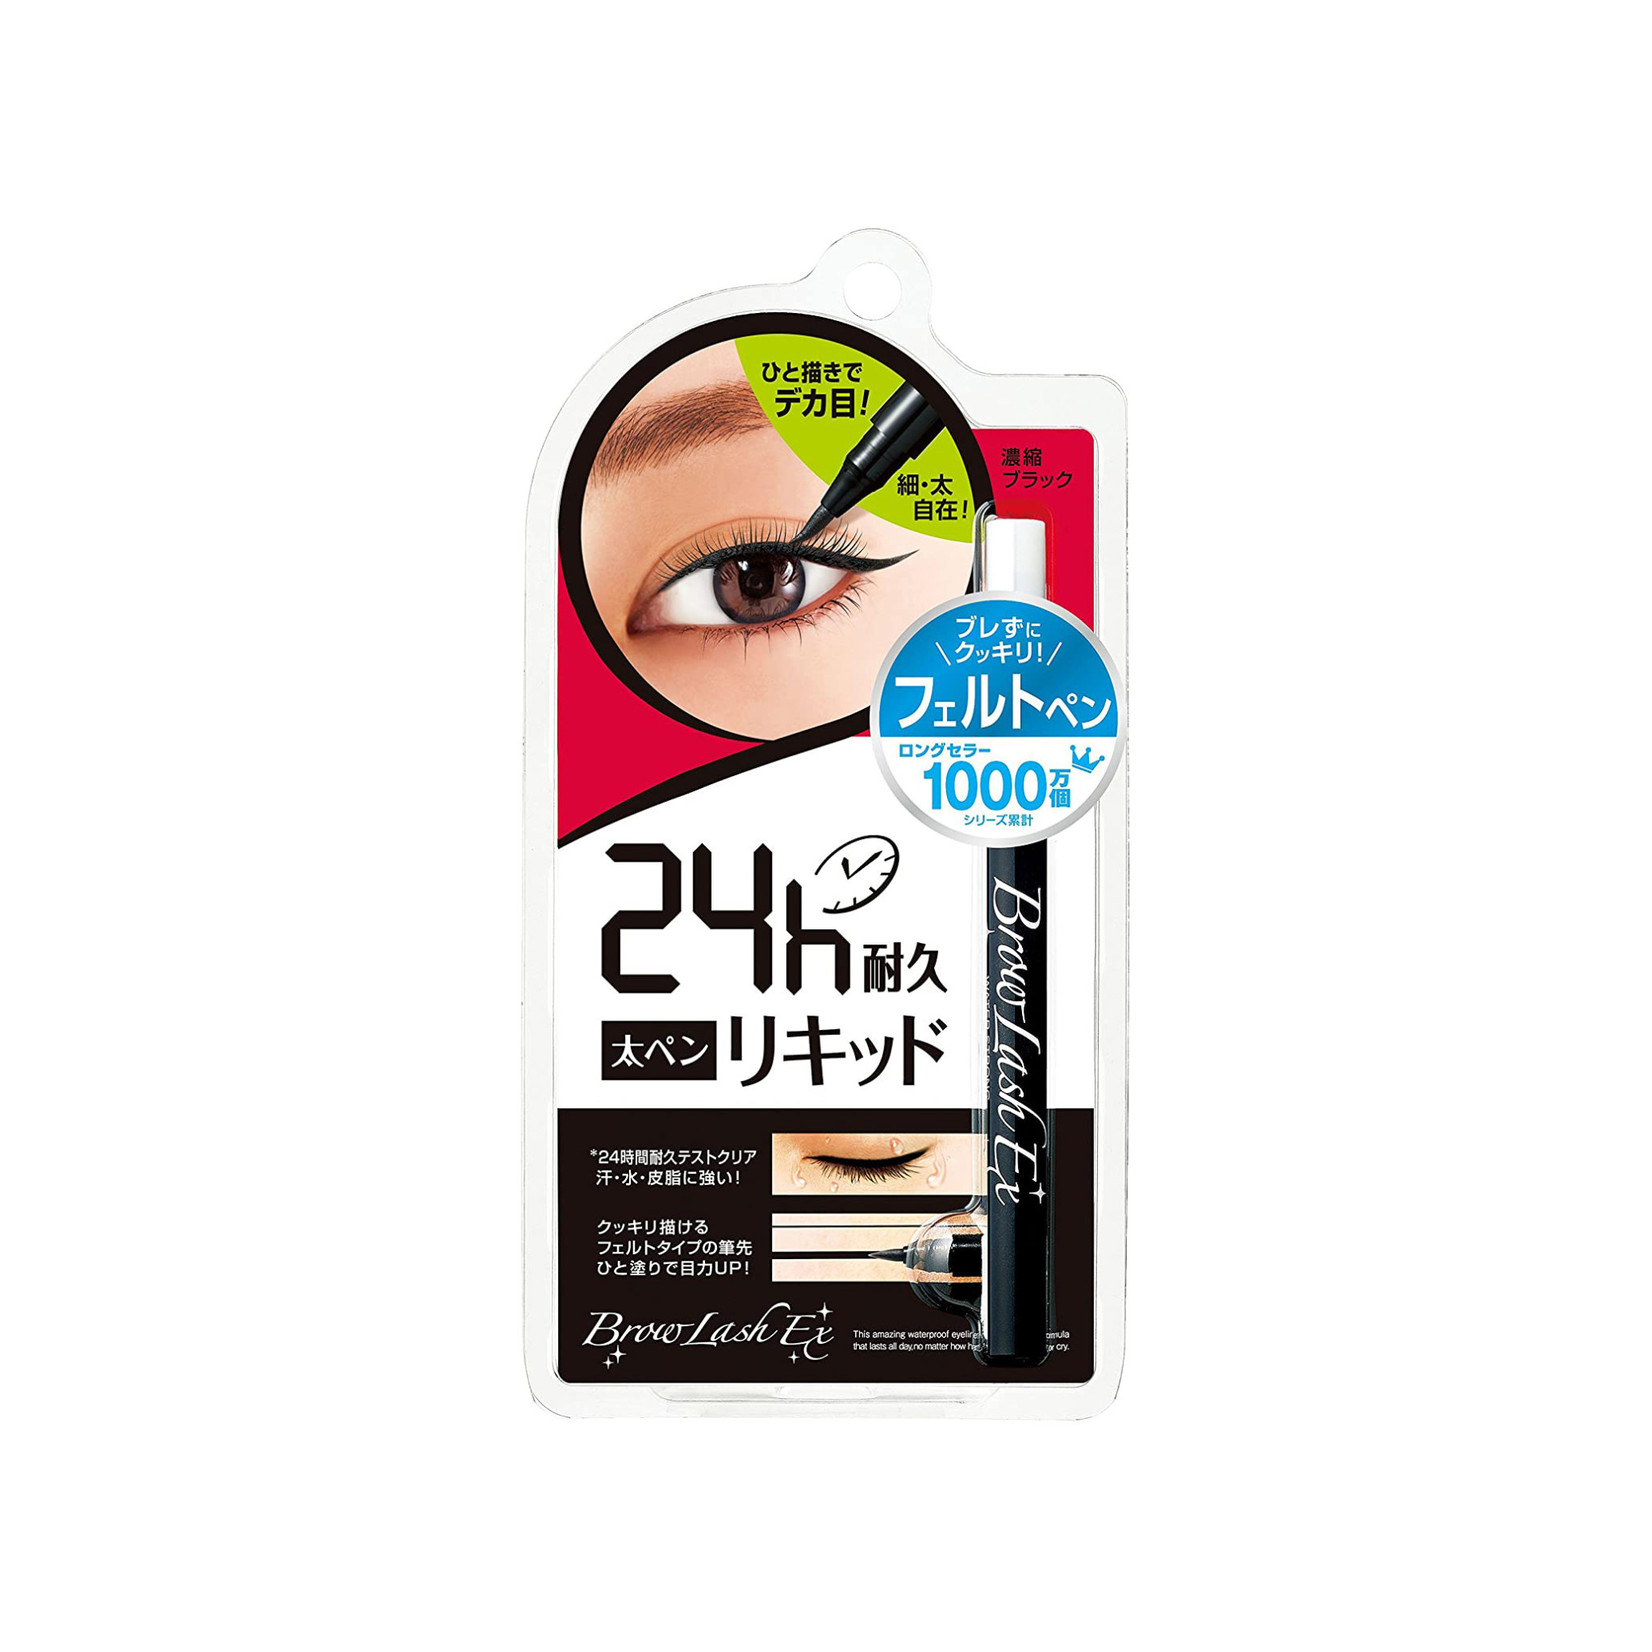 BCL BCL Browlash EX Water Strong Liner